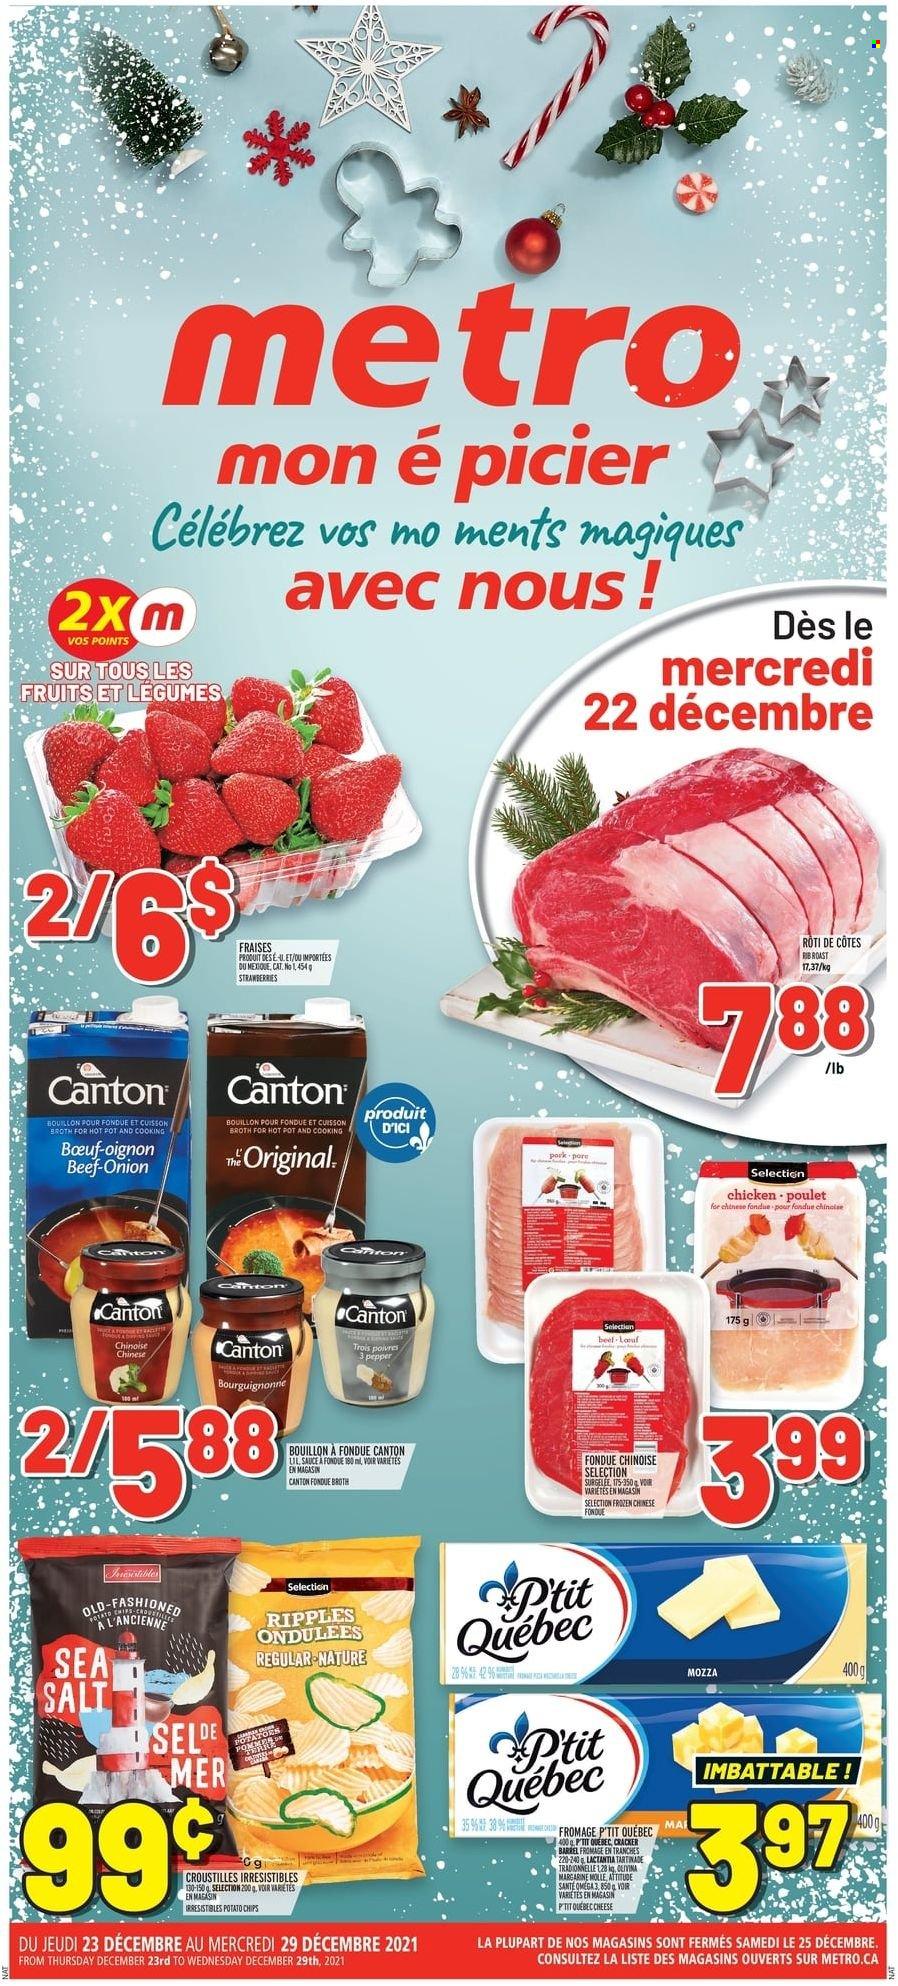 thumbnail - Metro Flyer - December 23, 2021 - December 29, 2021 - Sales products - onion, strawberries, sauce, cheese, margarine, crackers, potato chips, bouillon, broth, pot. Page 1.